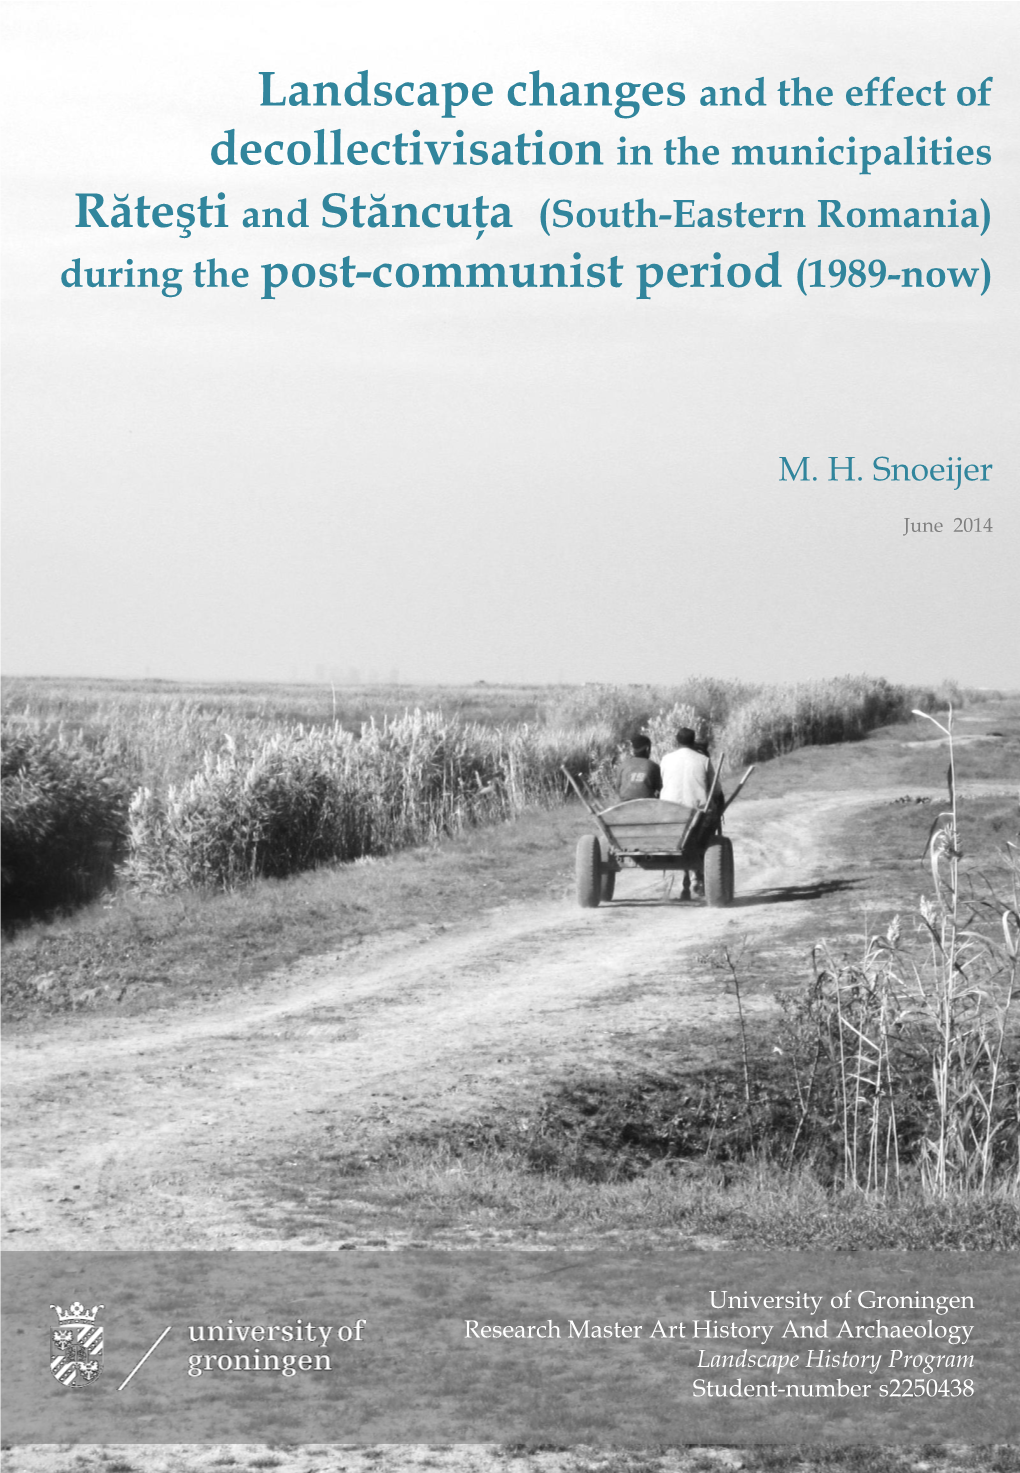 Landscape Changes and the Effect of Decollectivisation in the Municipalities Răteşti and Stăncuţa (South-Eastern Romania) During the Post-Communist Period (1989-Now)